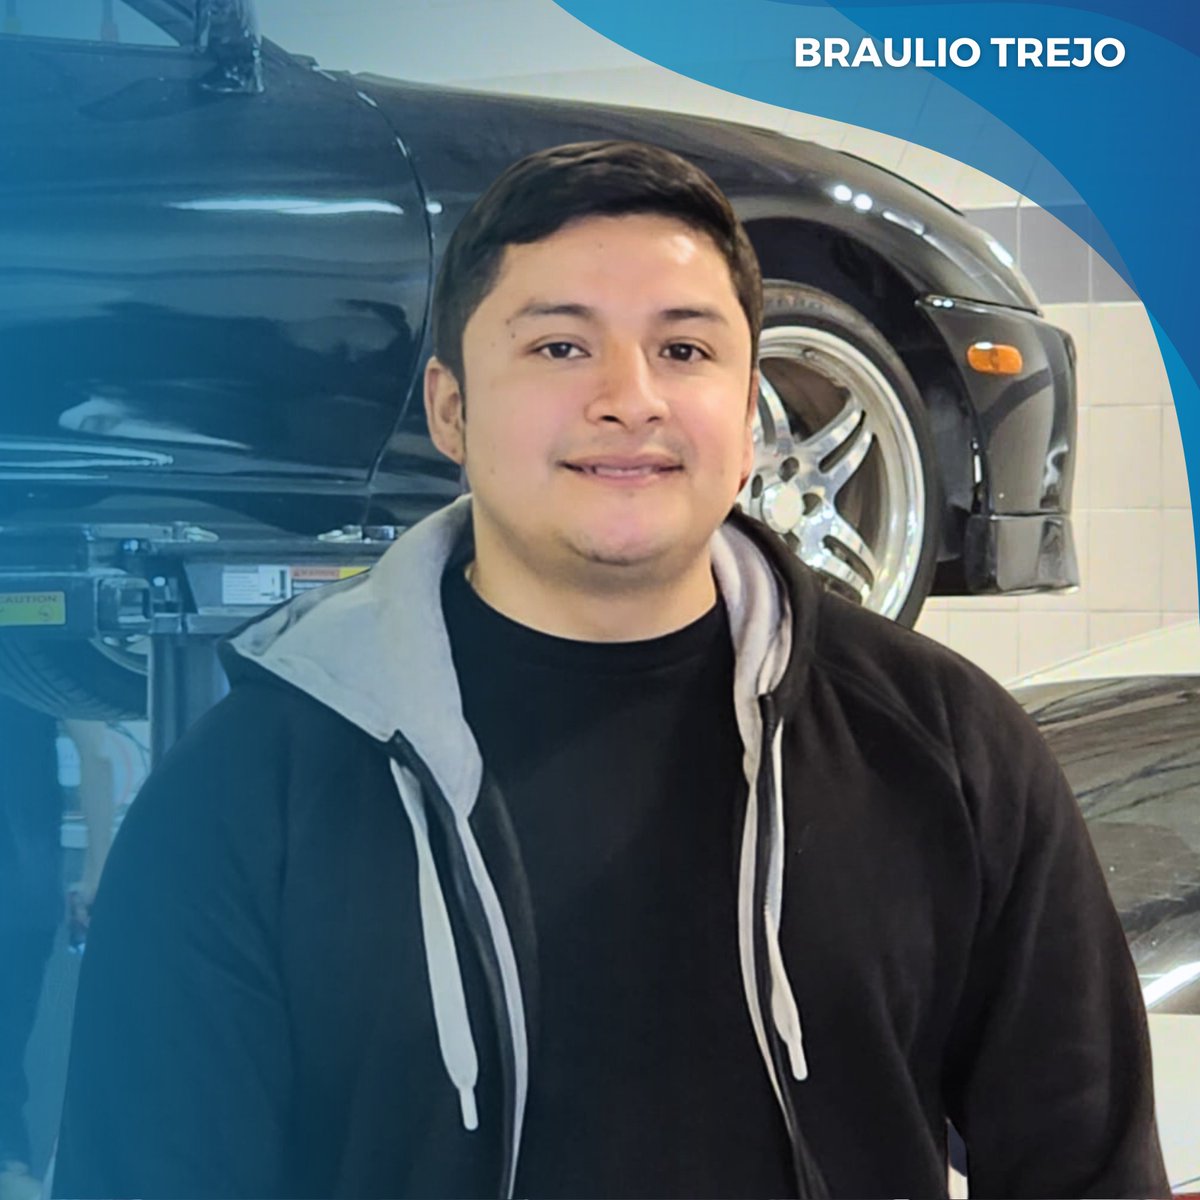 Introducing Our Newest Instructor! 🔧 We're excited to welcome Braulio Trejo to the Warren Henry Automotive Service program in South Dade! With a remarkable 10 years of field experience and as a graduate of our very own Robert Morgan Technical College. #YourBestChoiceMDCPS🌟